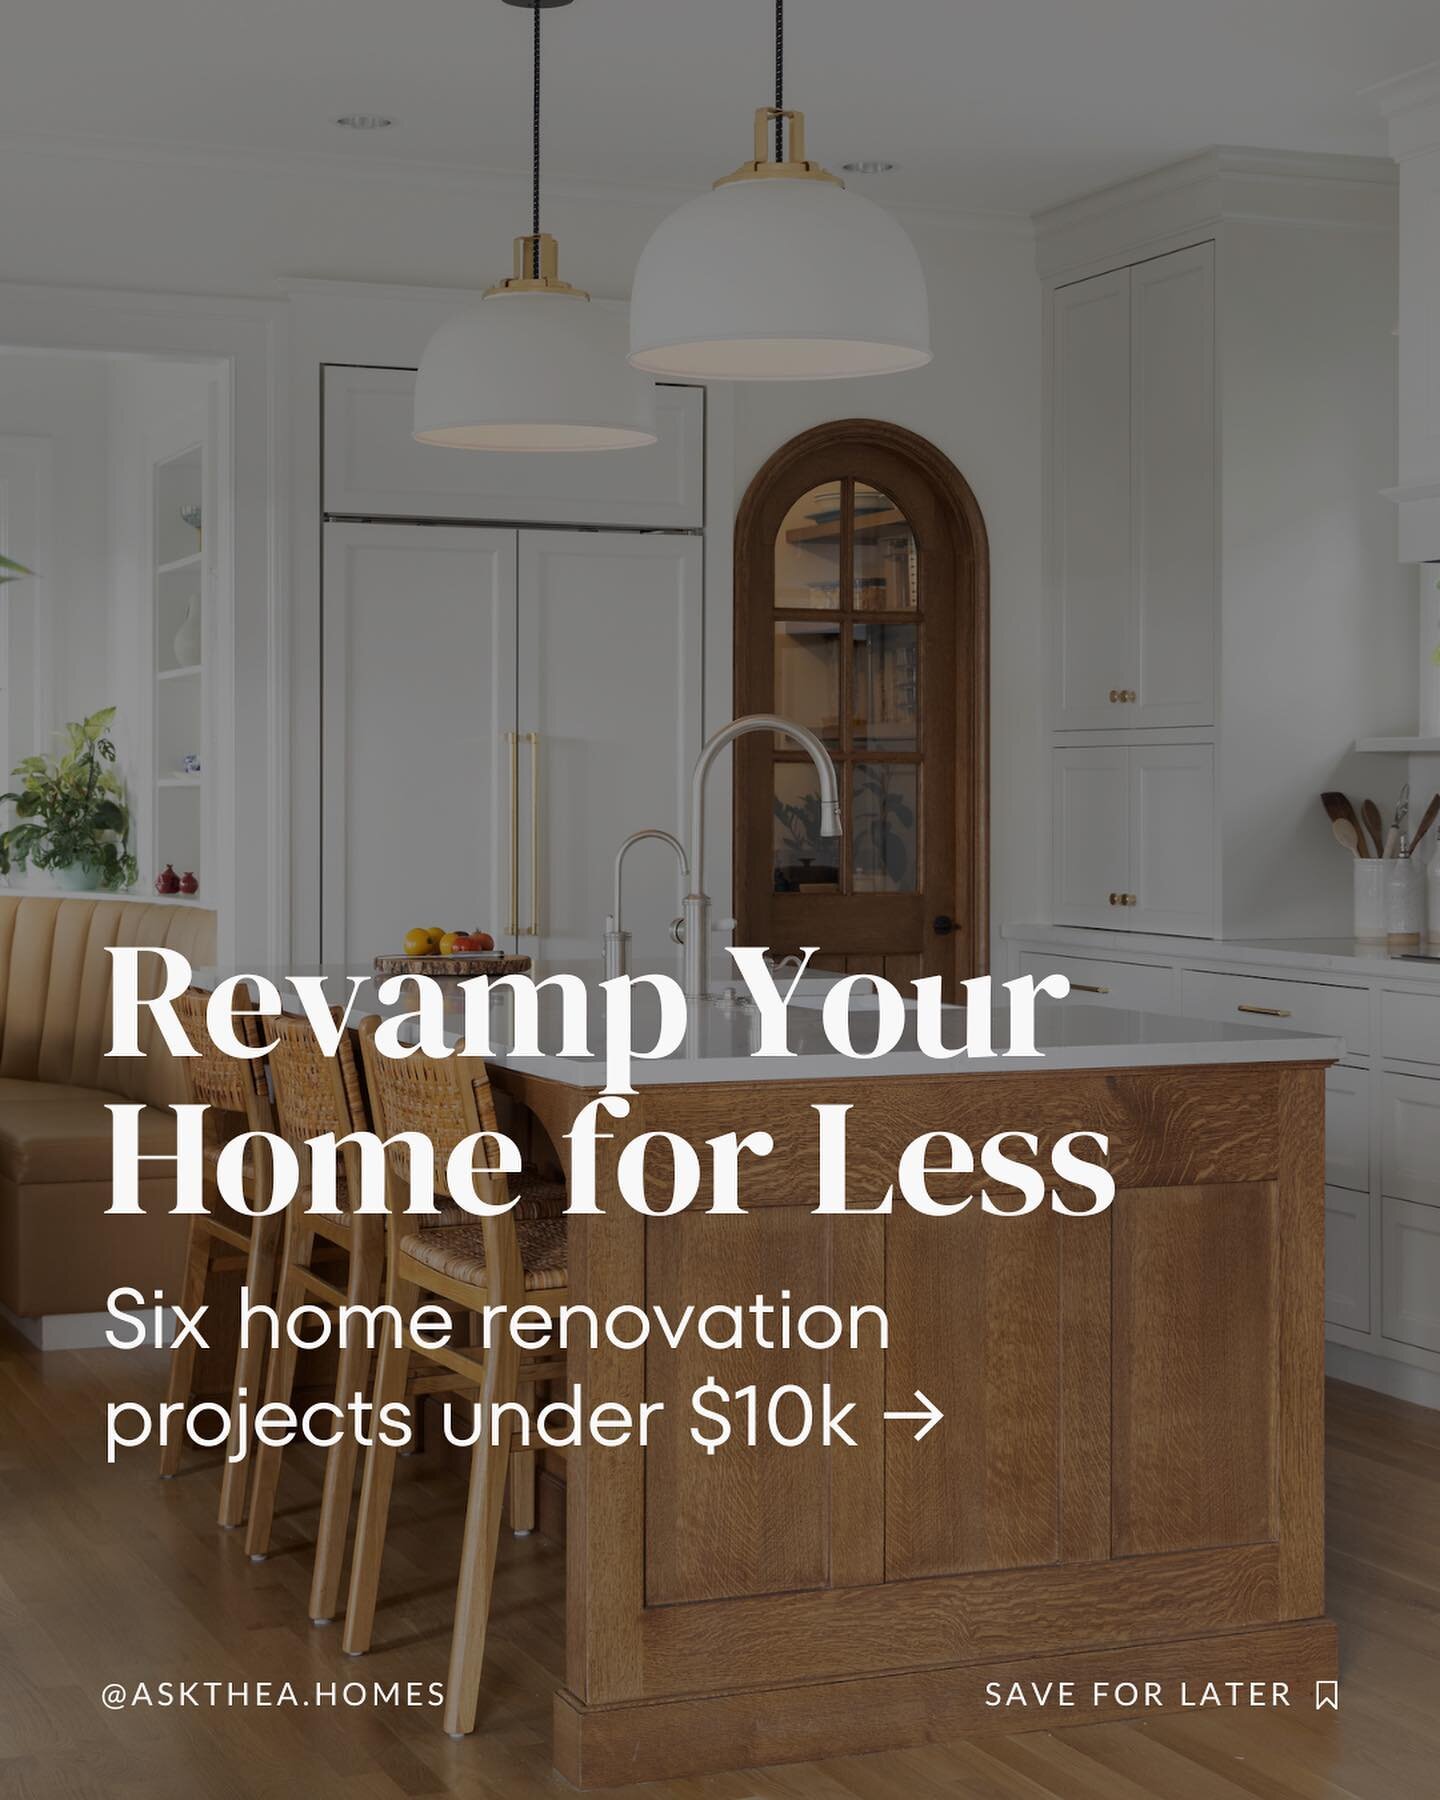 Want to add value to your home? These high-ROI renovations are the way to go.

Swipe to see the latest home reno projects that will elevate your ROI and give your home the modern upgrade it deserves. (Spoiler alert: It's all about curb appeal.)